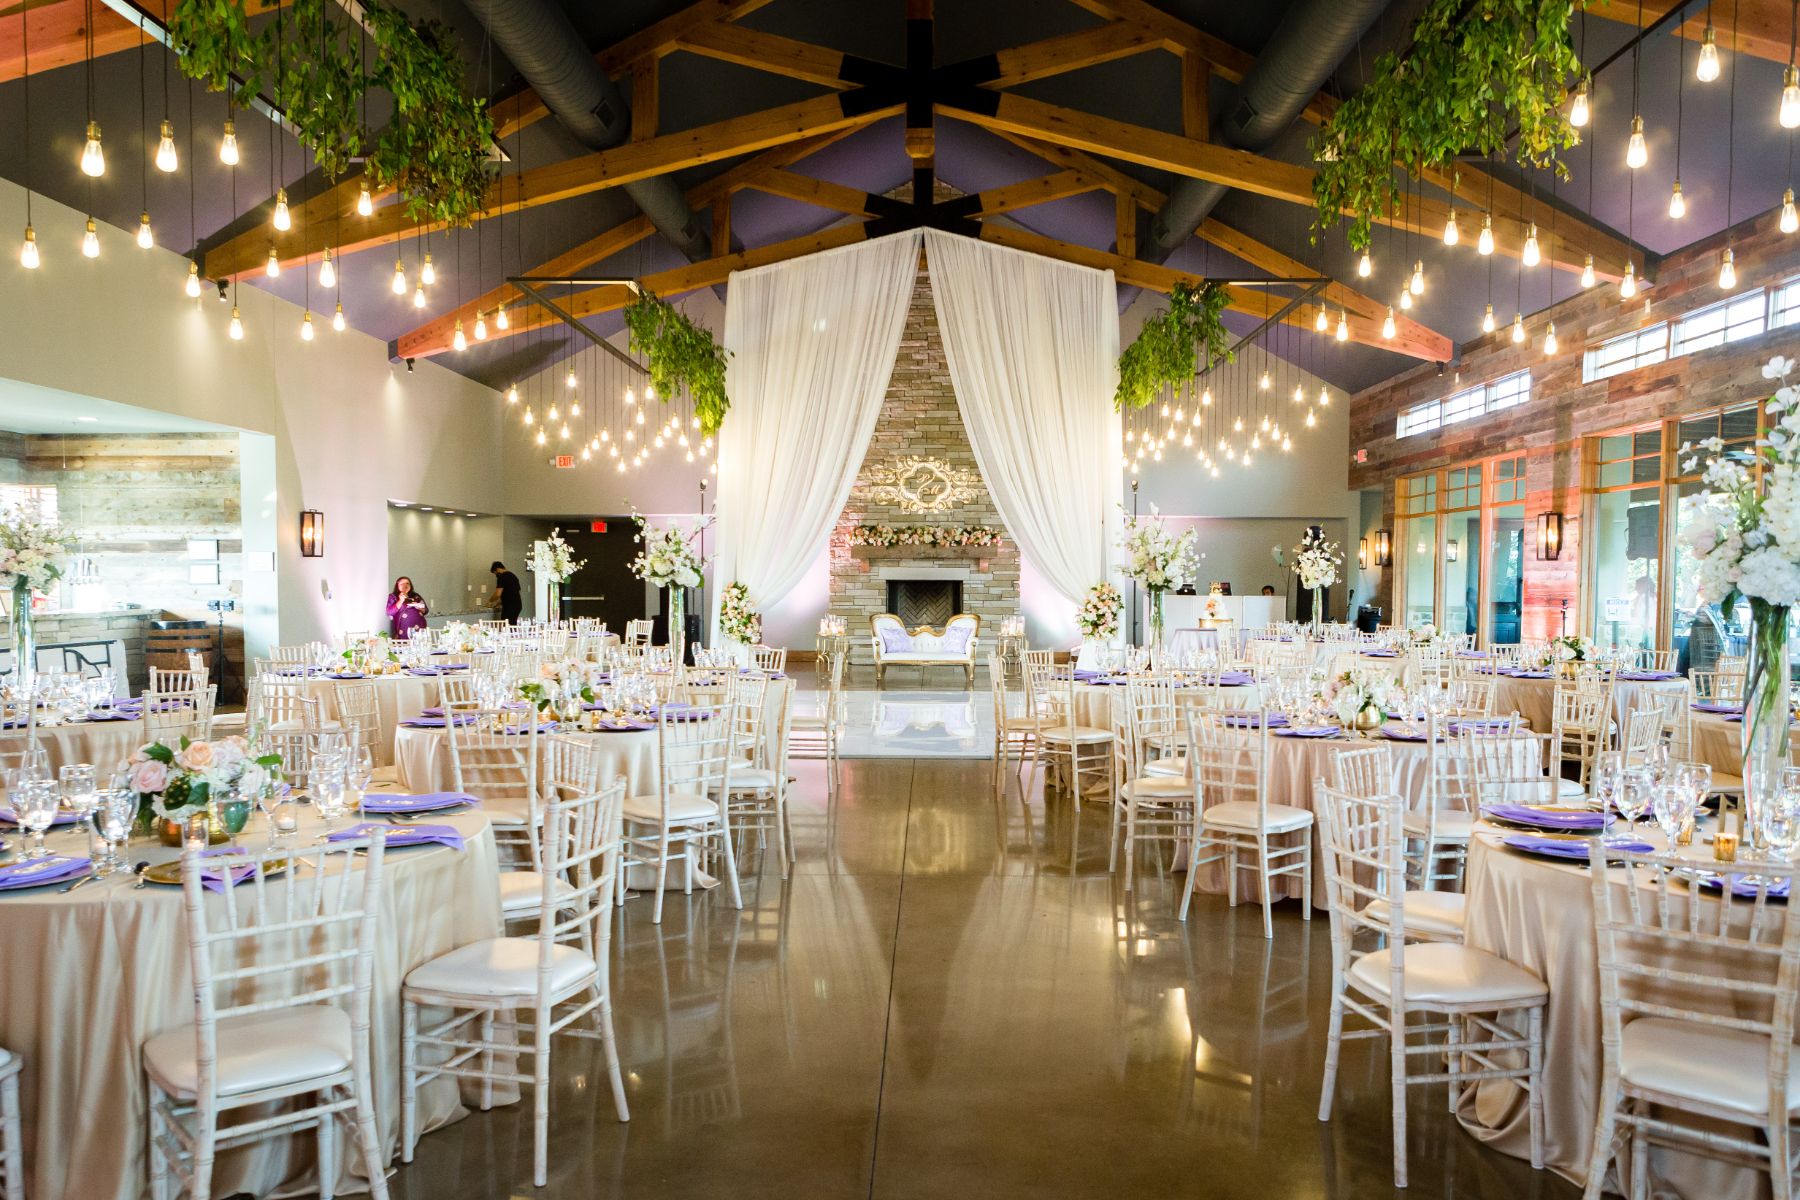 A Canyonwood Ridge wedding reception is set up in an extravagant banquet hall with wood, exposed beans and drop down pendant. Bistro lights. The tables have pink and purple color accents.